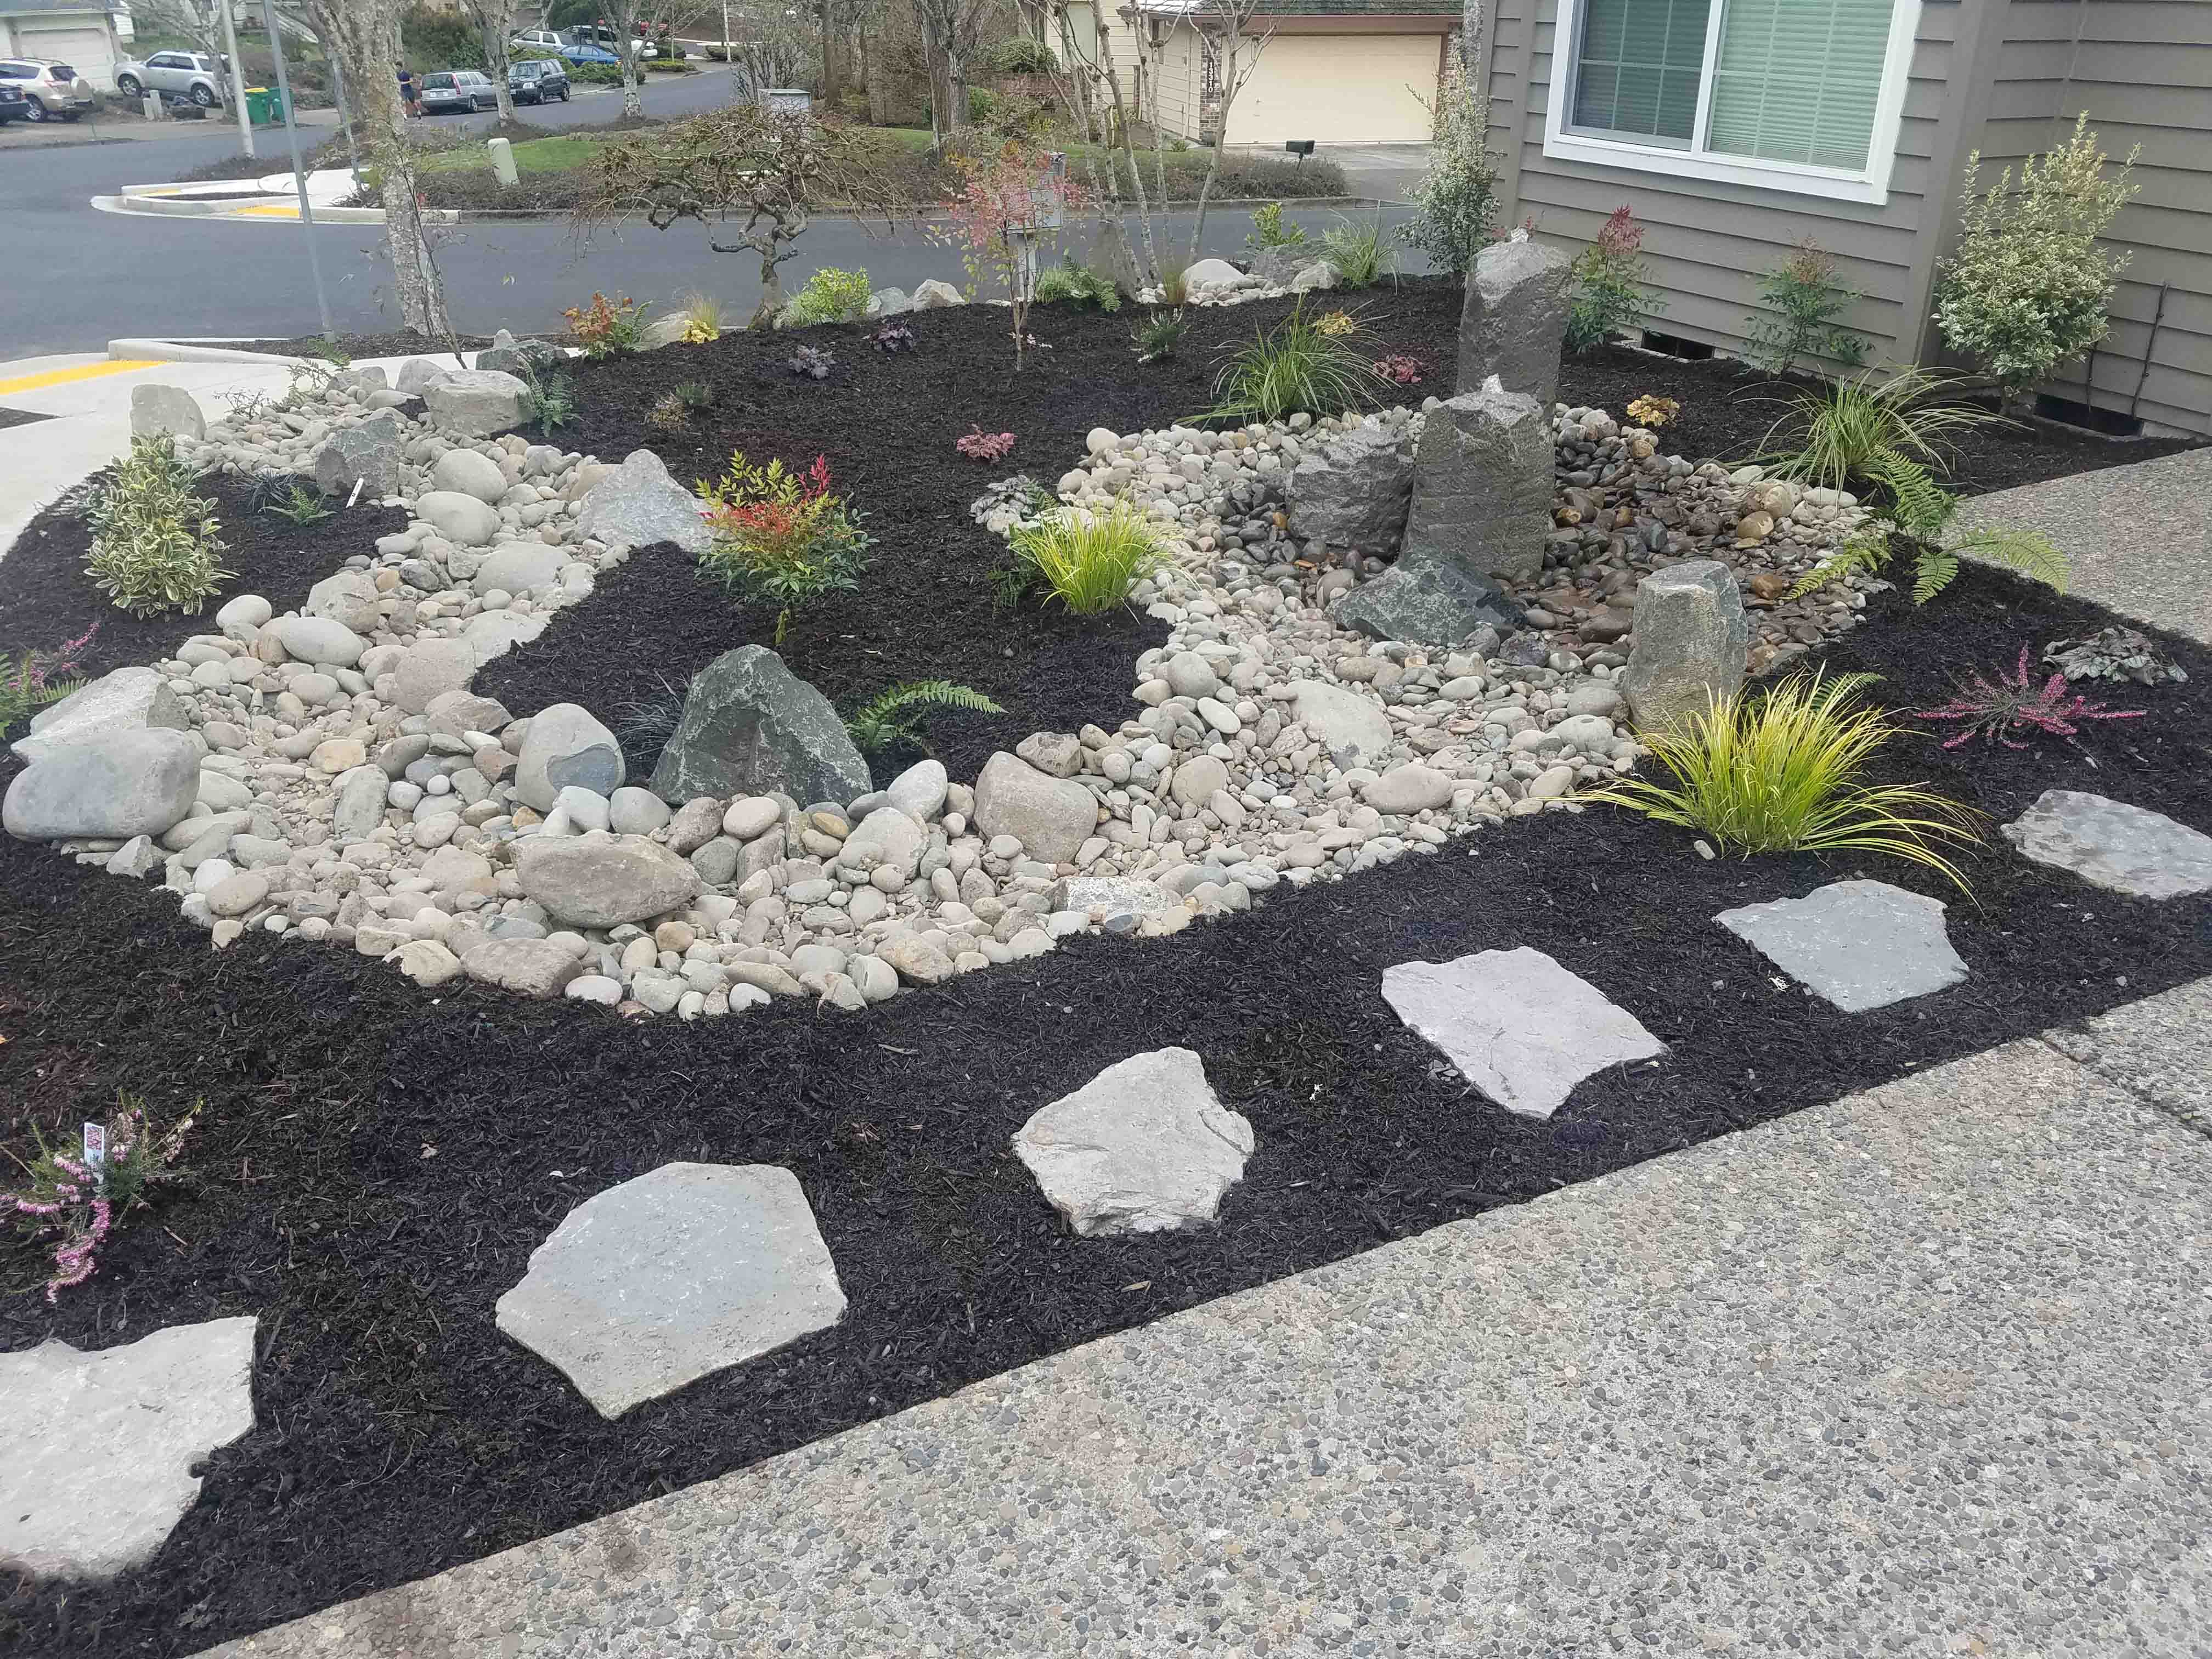 All new front yard filled with mulch and stone including a new stone water fountain and new plants